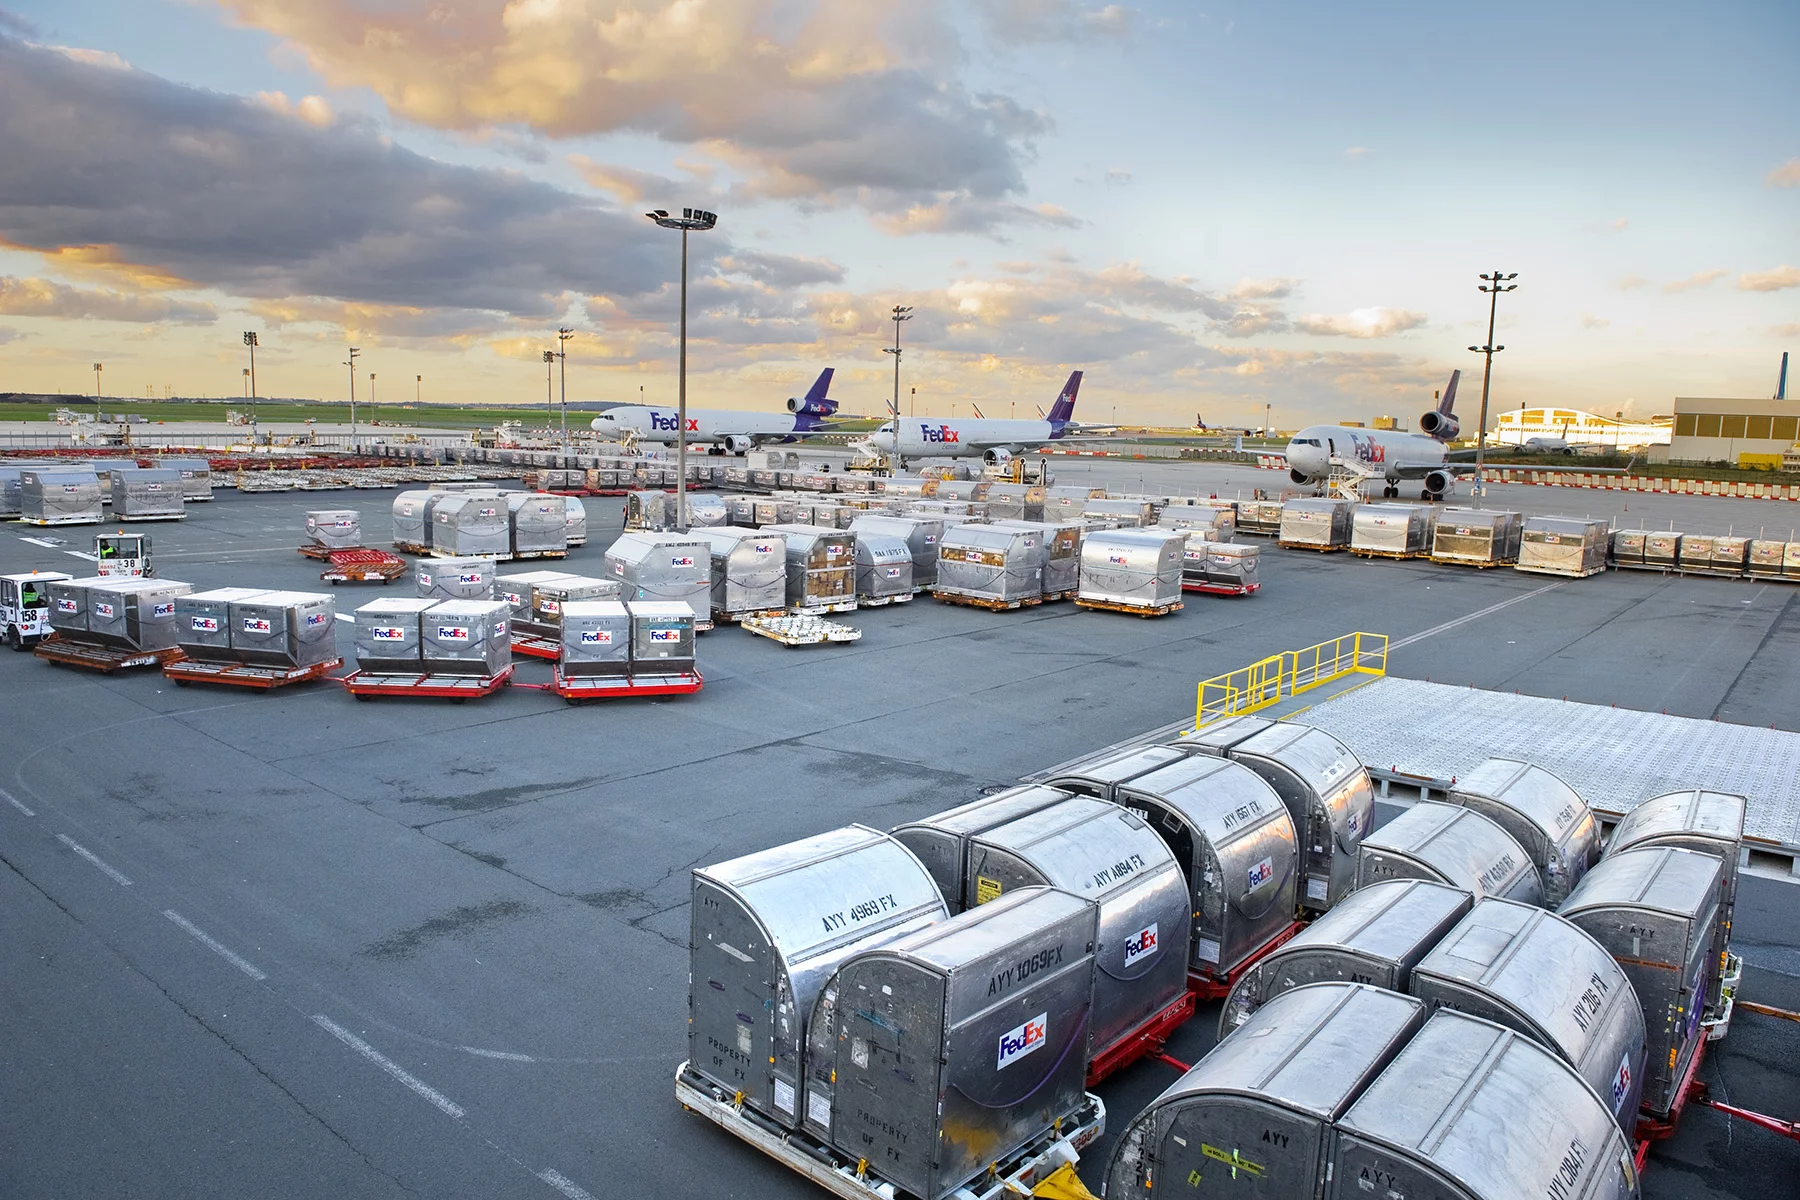 Cargo waiting to be loaded at Paris Charles de Gaulle Airport in Roissy, France